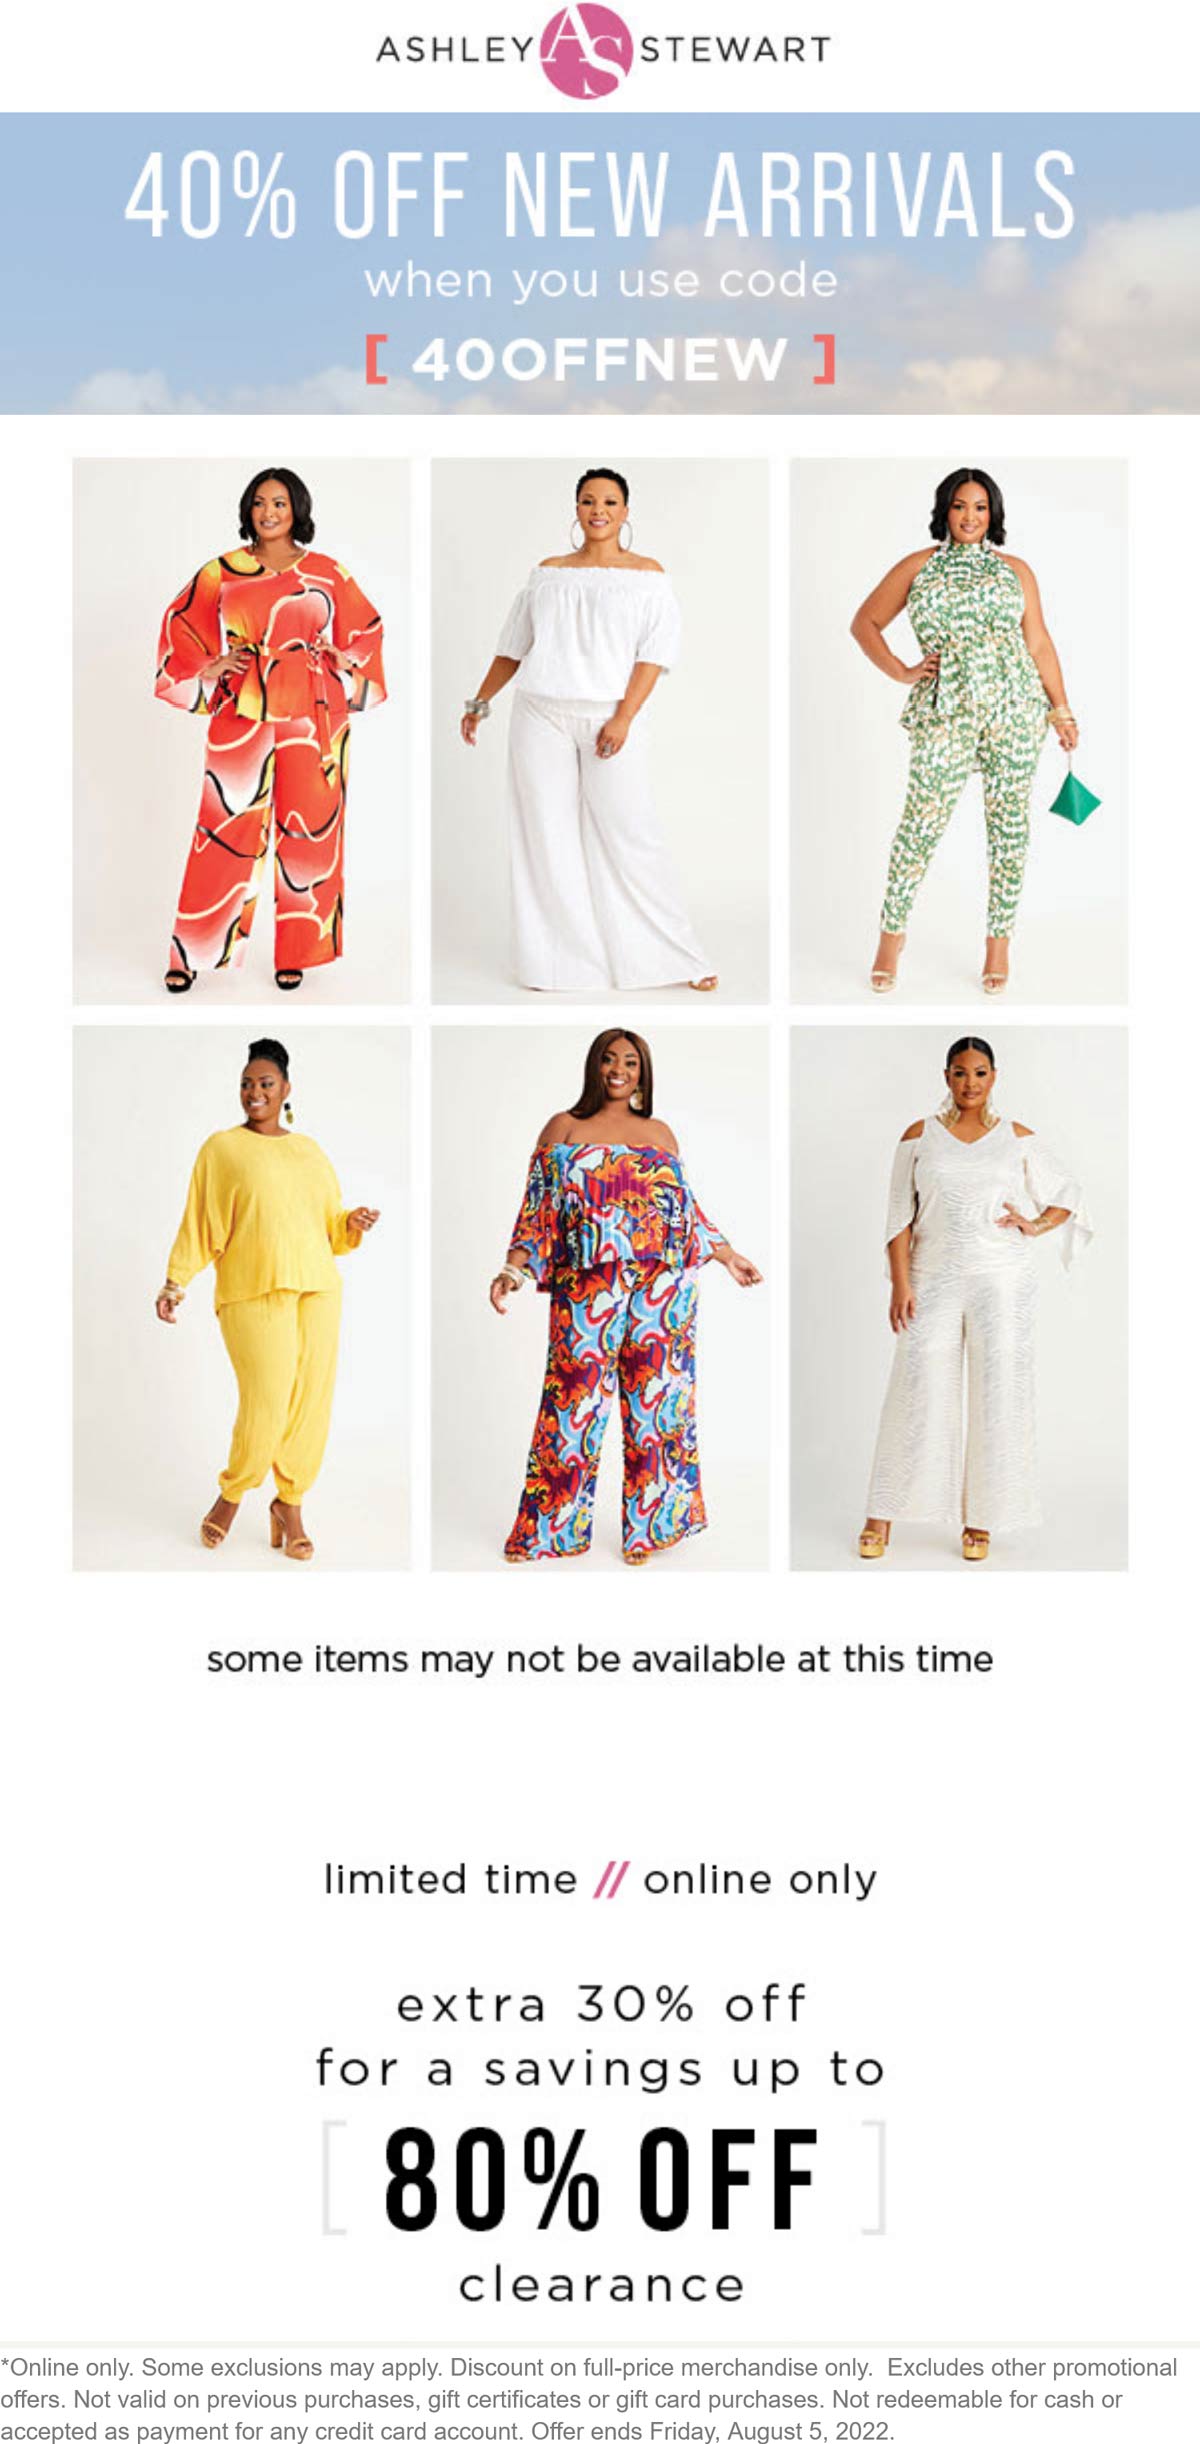 Ashley Stewart stores Coupon  40% off new arrivals at Ashley Stewart via promo code 40OFFNEW #ashleystewart 